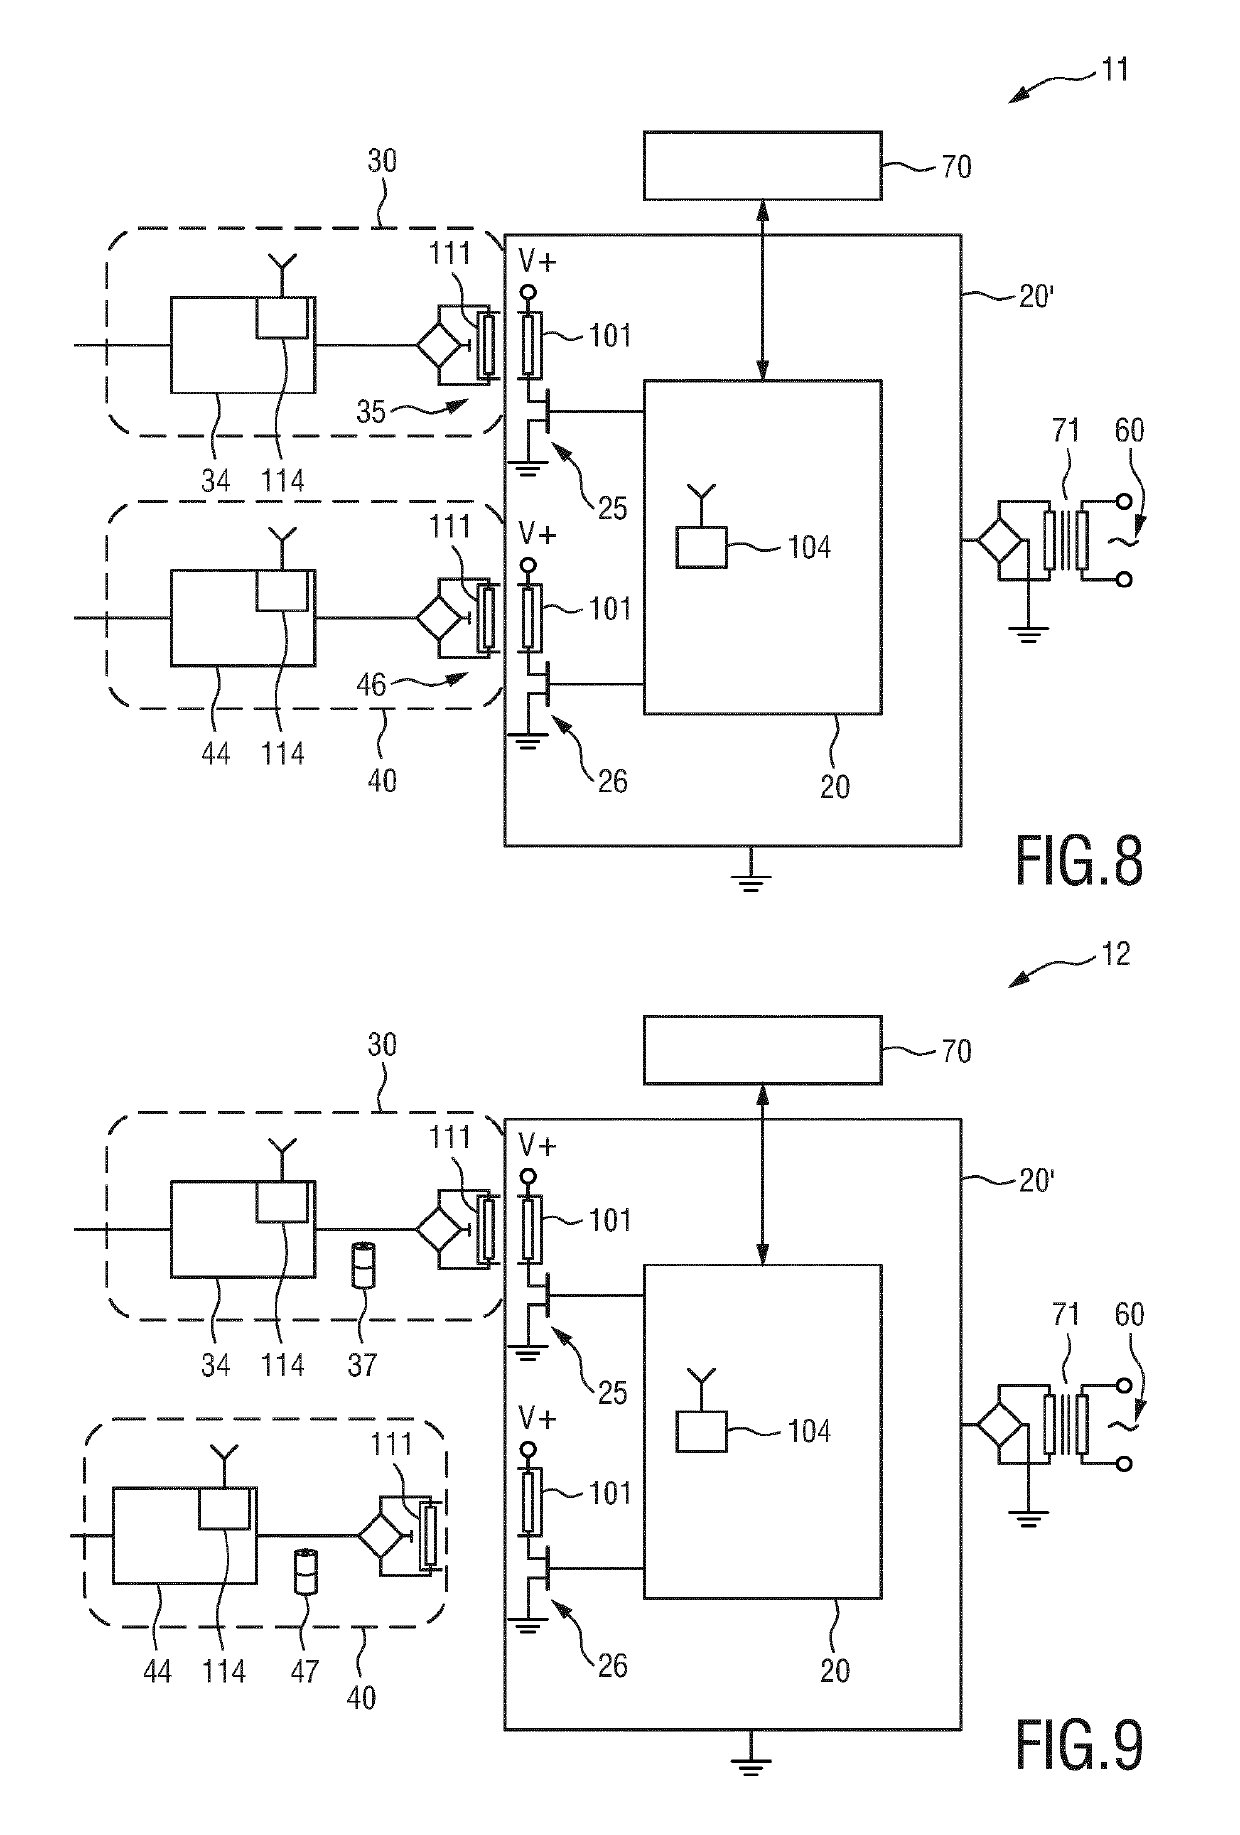 Connector and device for wireless transmission of data and power